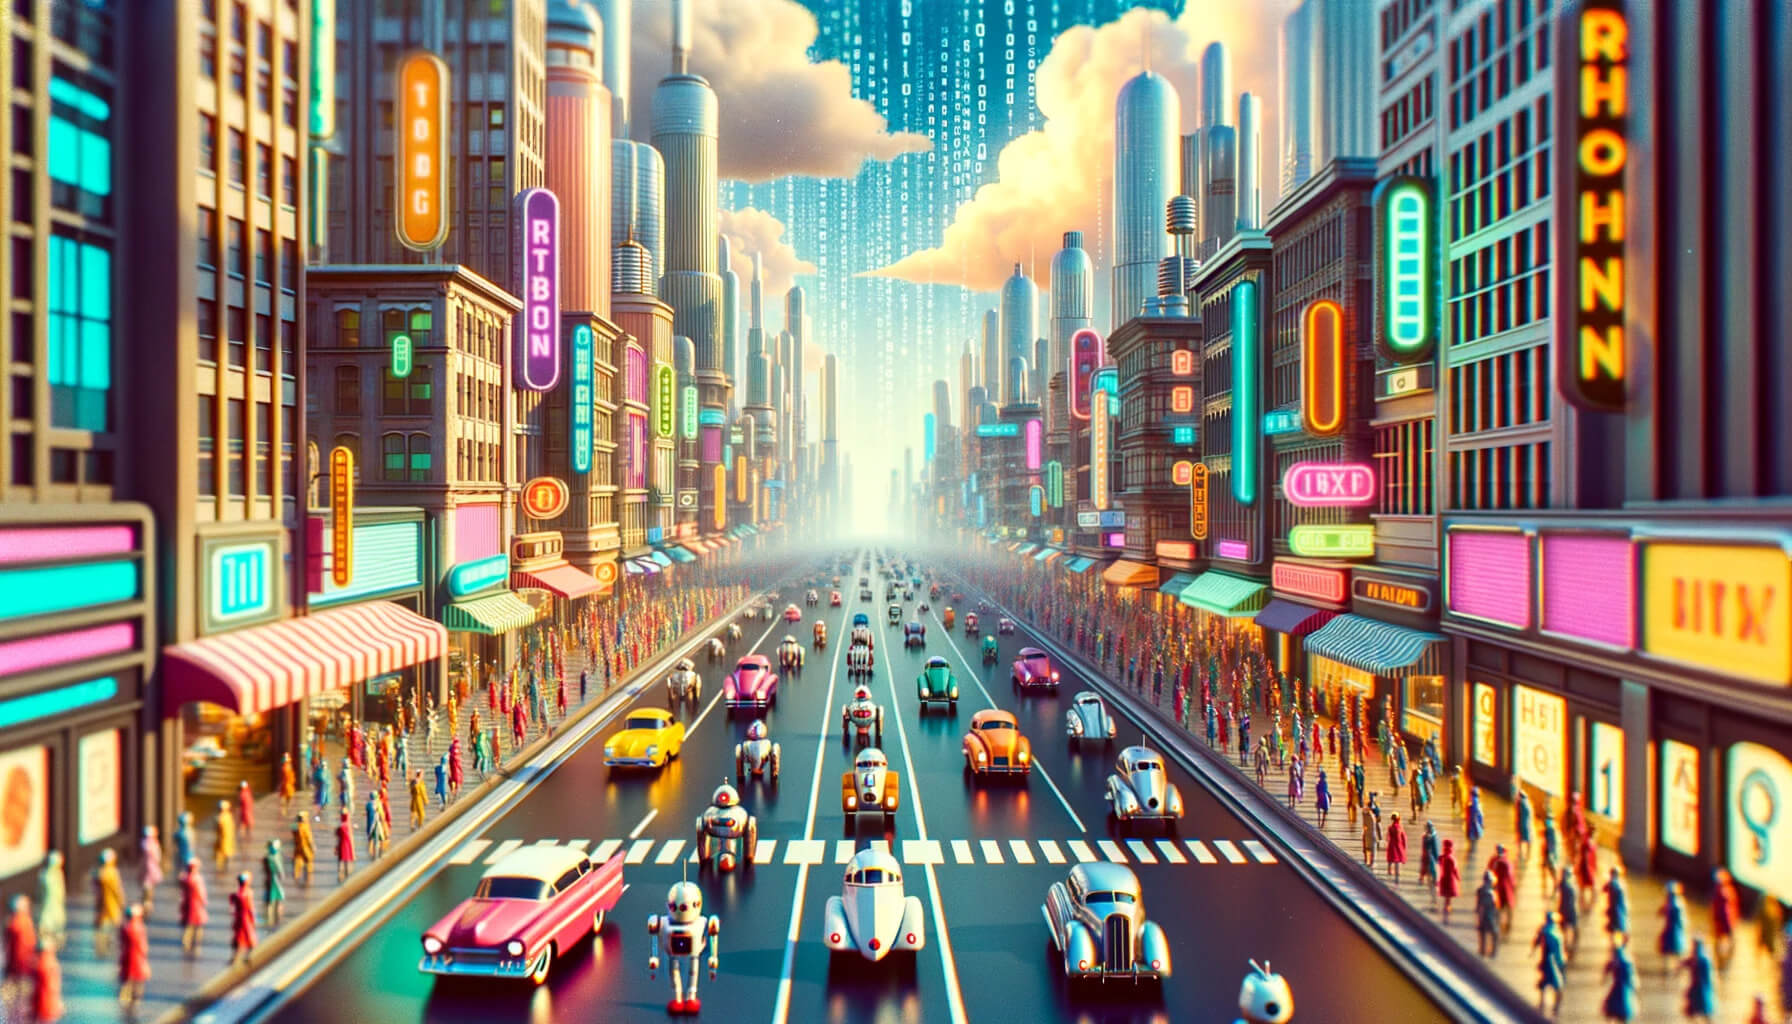 A vivid and bustling retro-futuristic cityscape filled with vintage-style robots and cars. Neon signs adorn the buildings, illuminating the streets where colorful crowds of people and robots coexist and interact, creating a harmonious blend of past and future aesthetics.